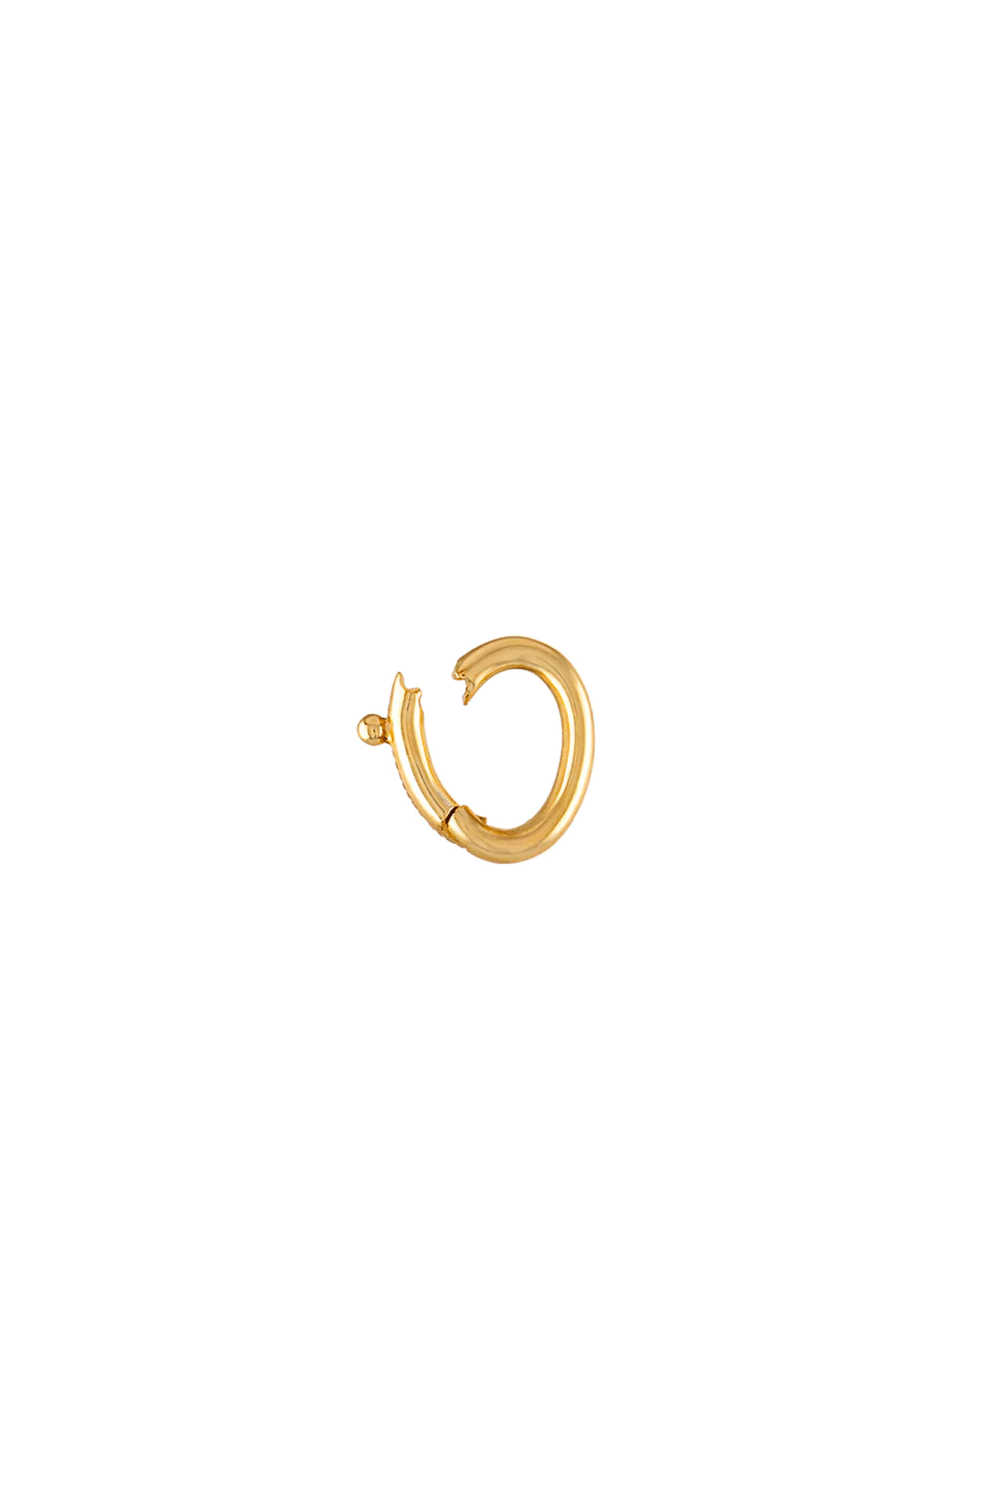 Our signature Open Bale 14K Yellow Gold is the perfect accessory for your charms.